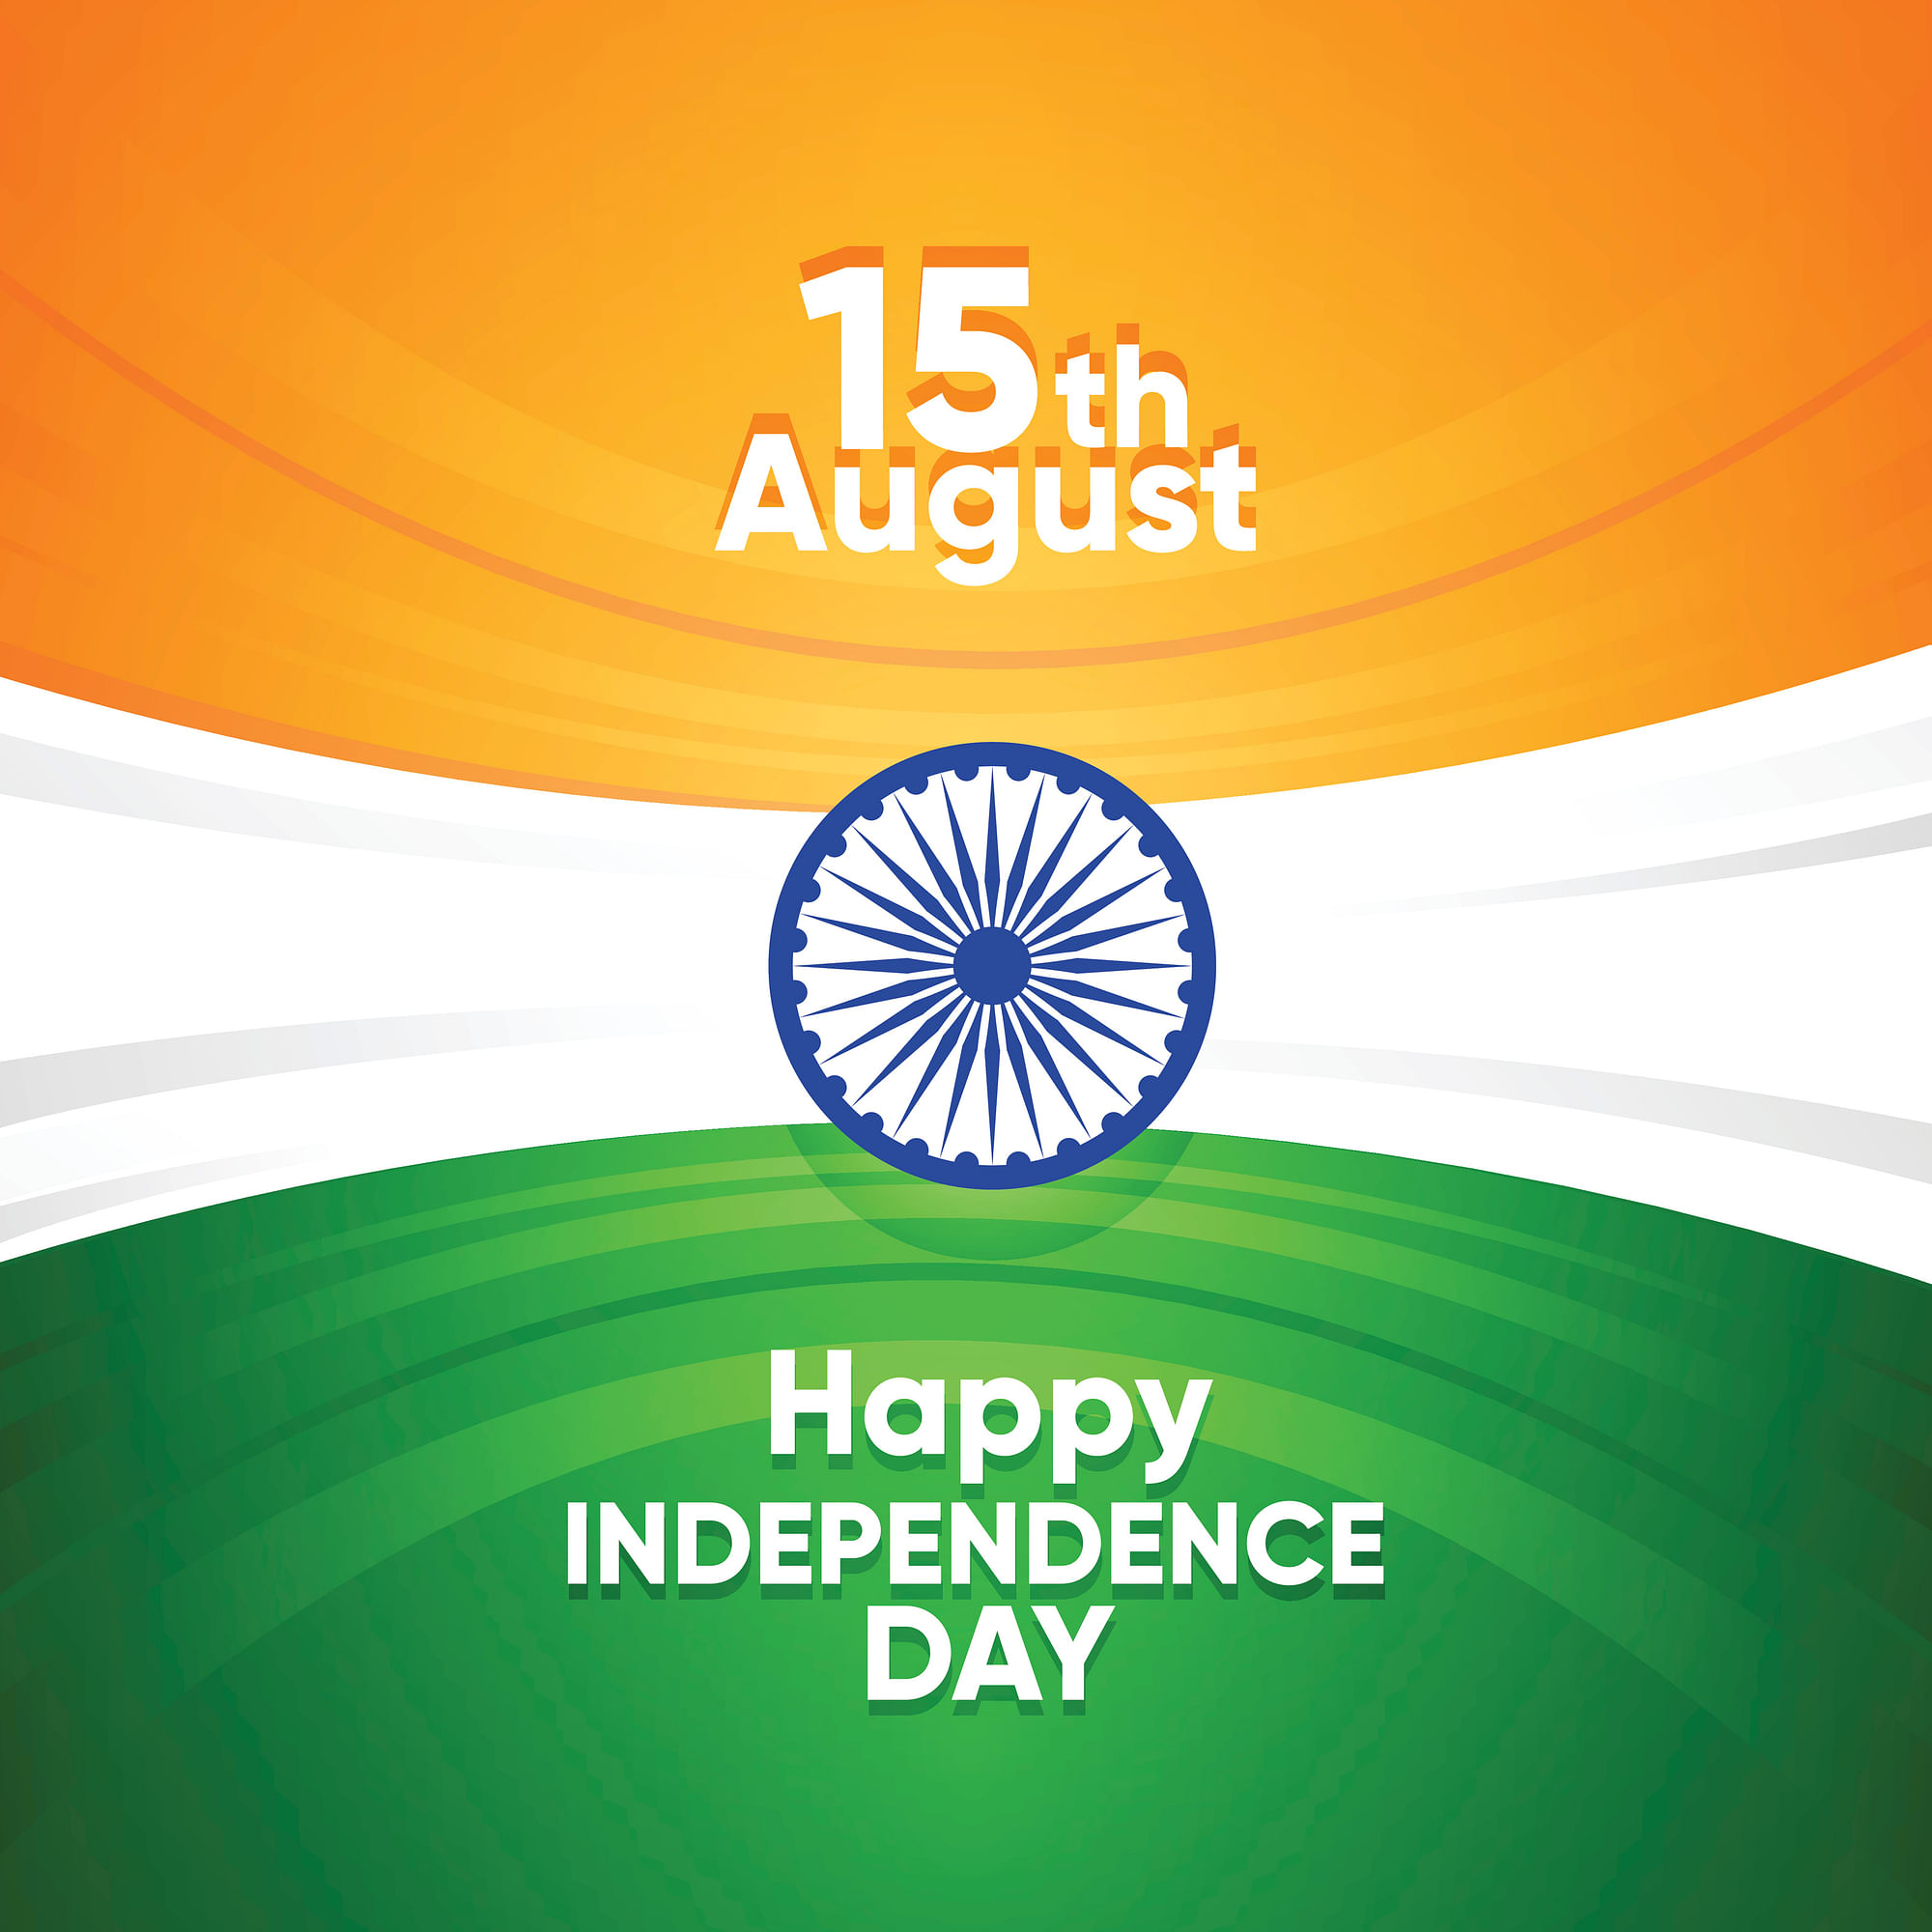 74th-independence-day-wishes-in-hindi-and-english-15-august-wishes